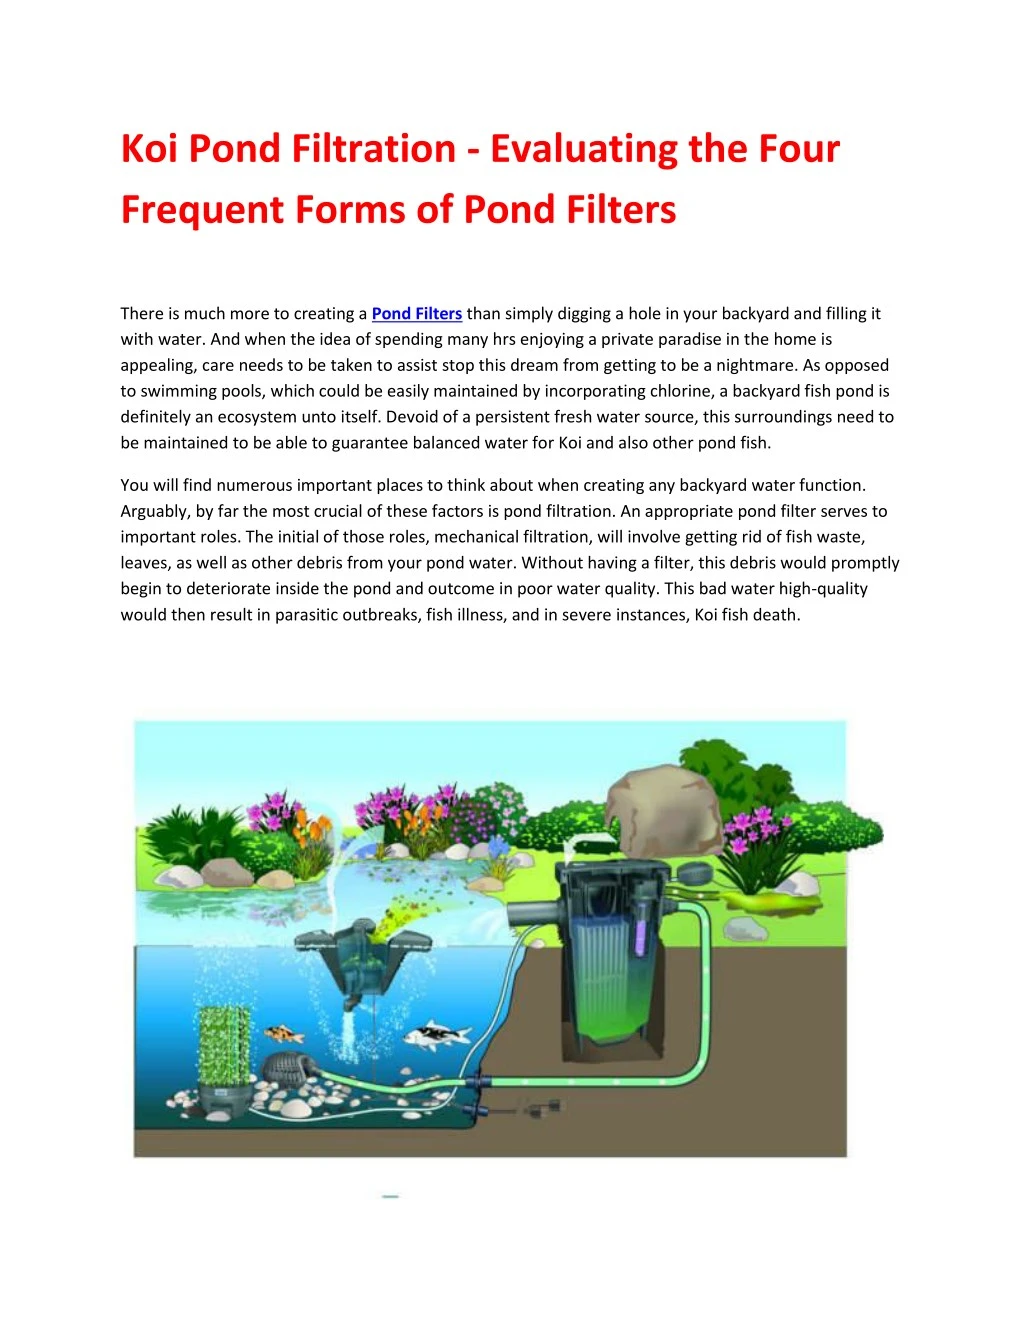 koi pond filtration evaluating the four frequent